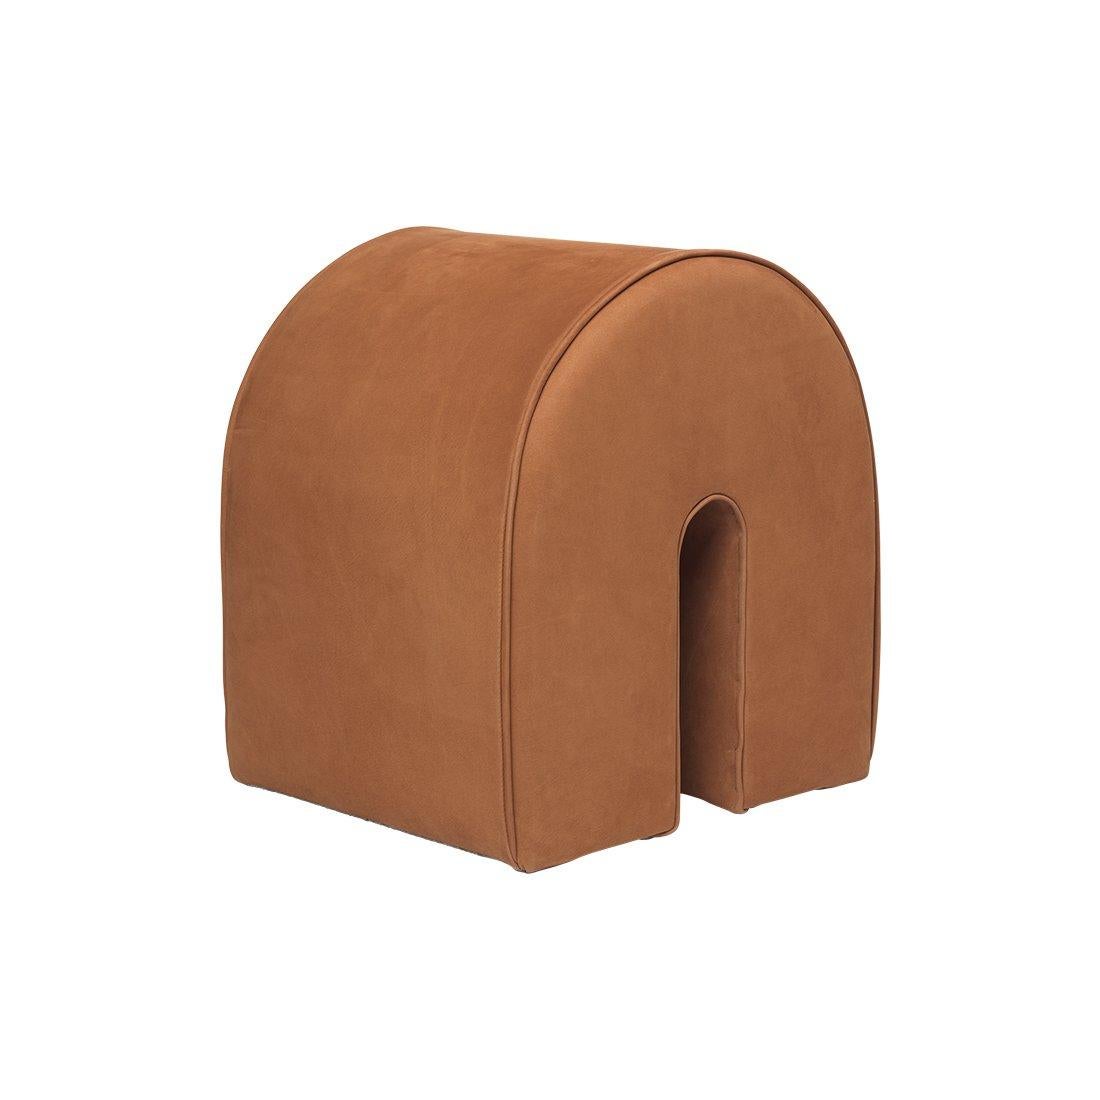 Brown curved pouf by Kristina Dam Studio.
Materials: Brown Aniline Nubuck. 
Also available in other colors. 
Dimensions: 36 x 42 x H 42cm.

The Modernist furniture collection takes notions of modern design and yet the distinctive design touch